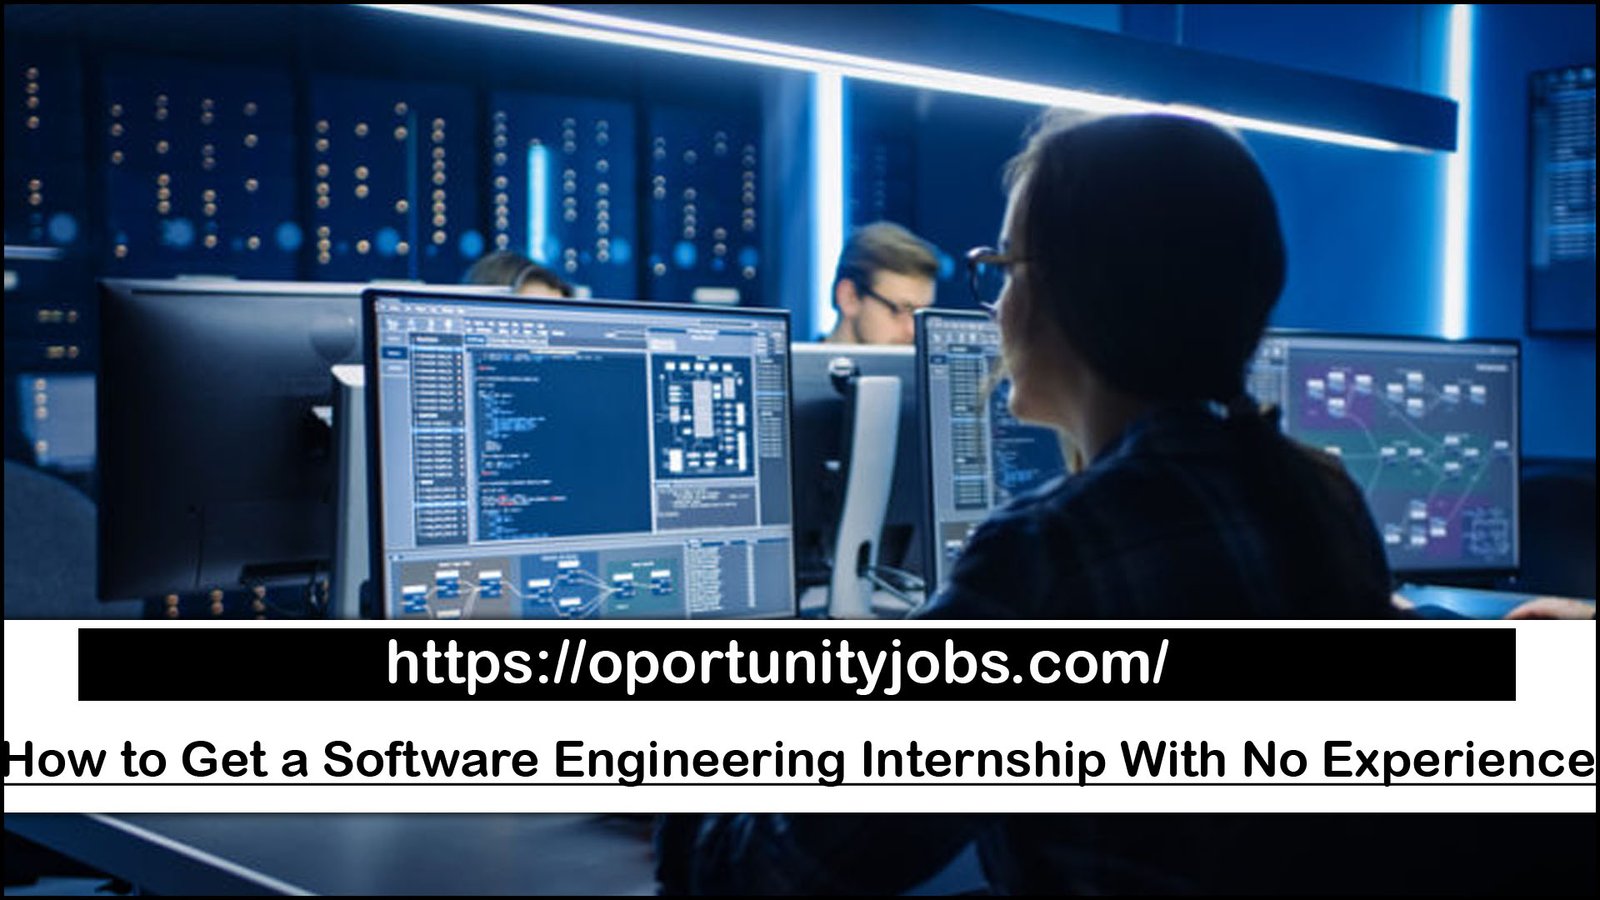 How to Get a Software Engineering Internship With No Experience